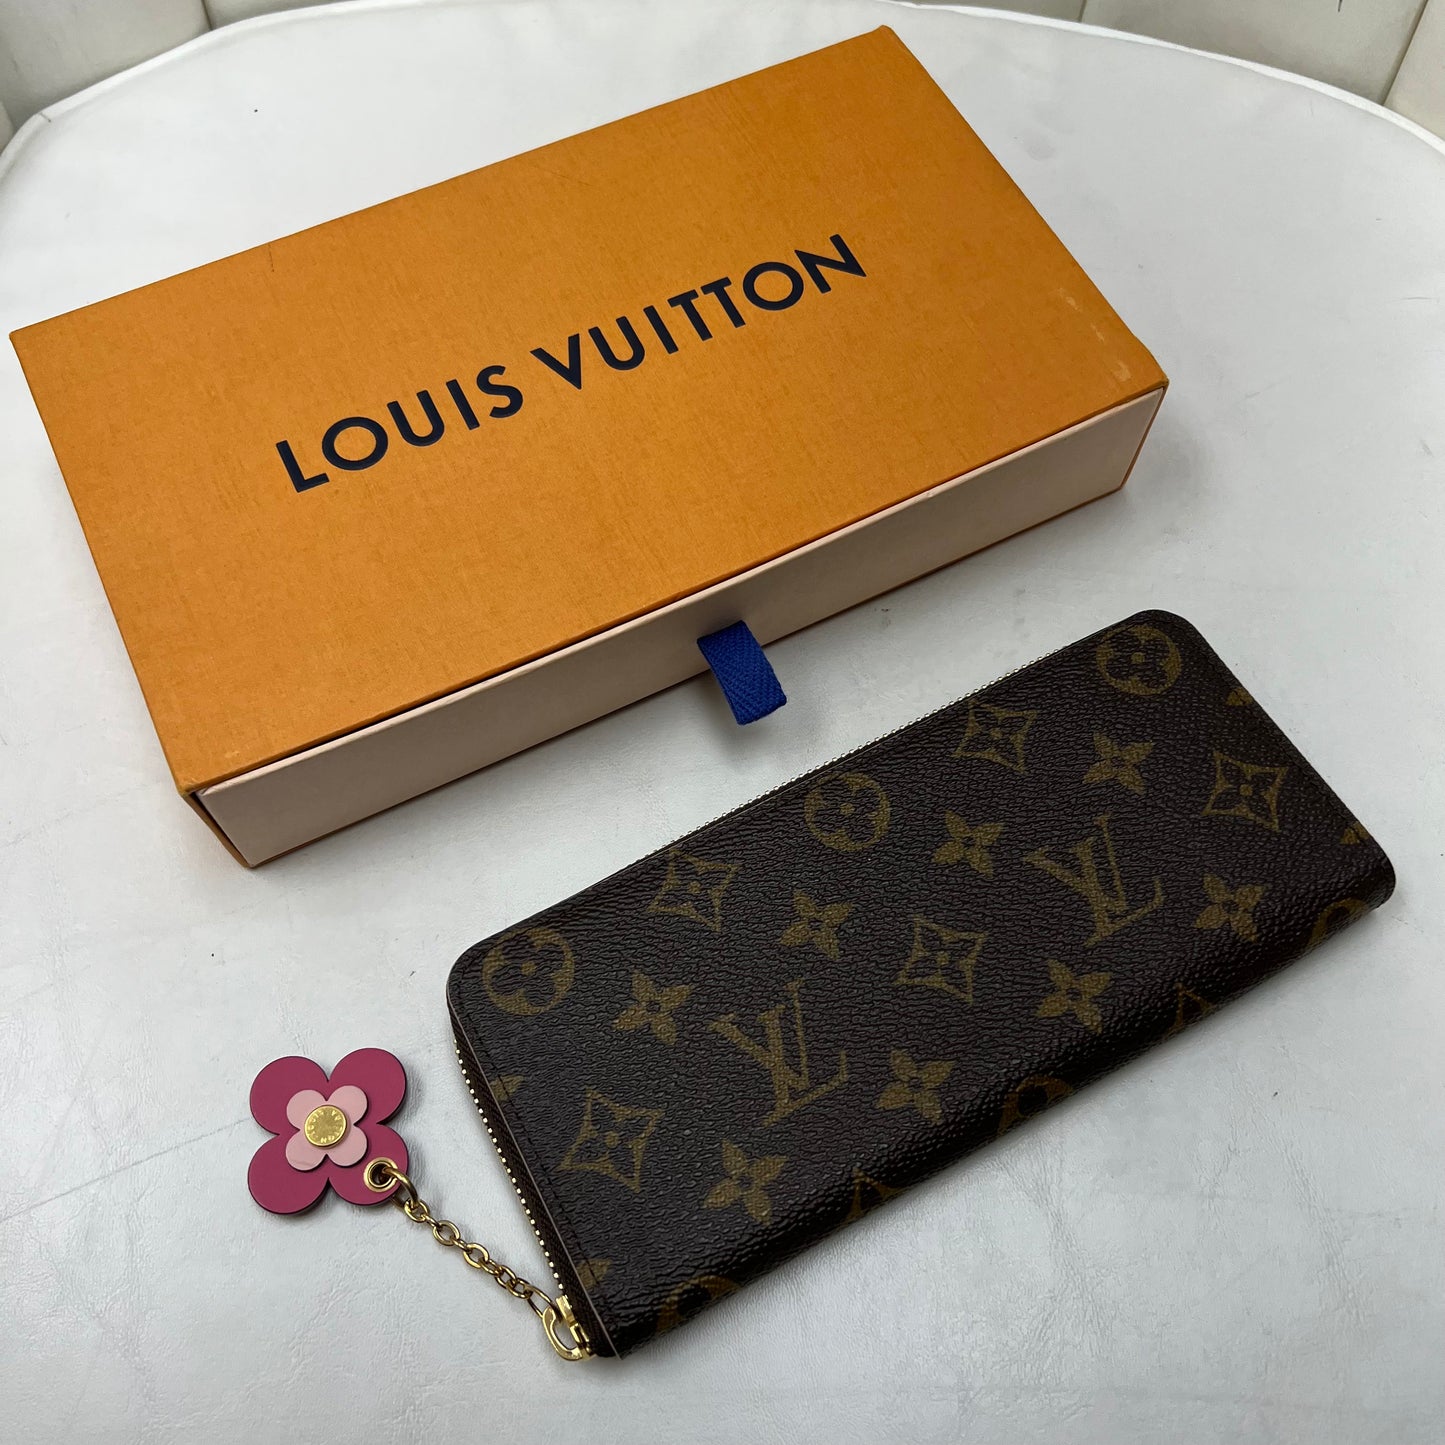 Louis Vuitton Limited Flower Clemence with Box